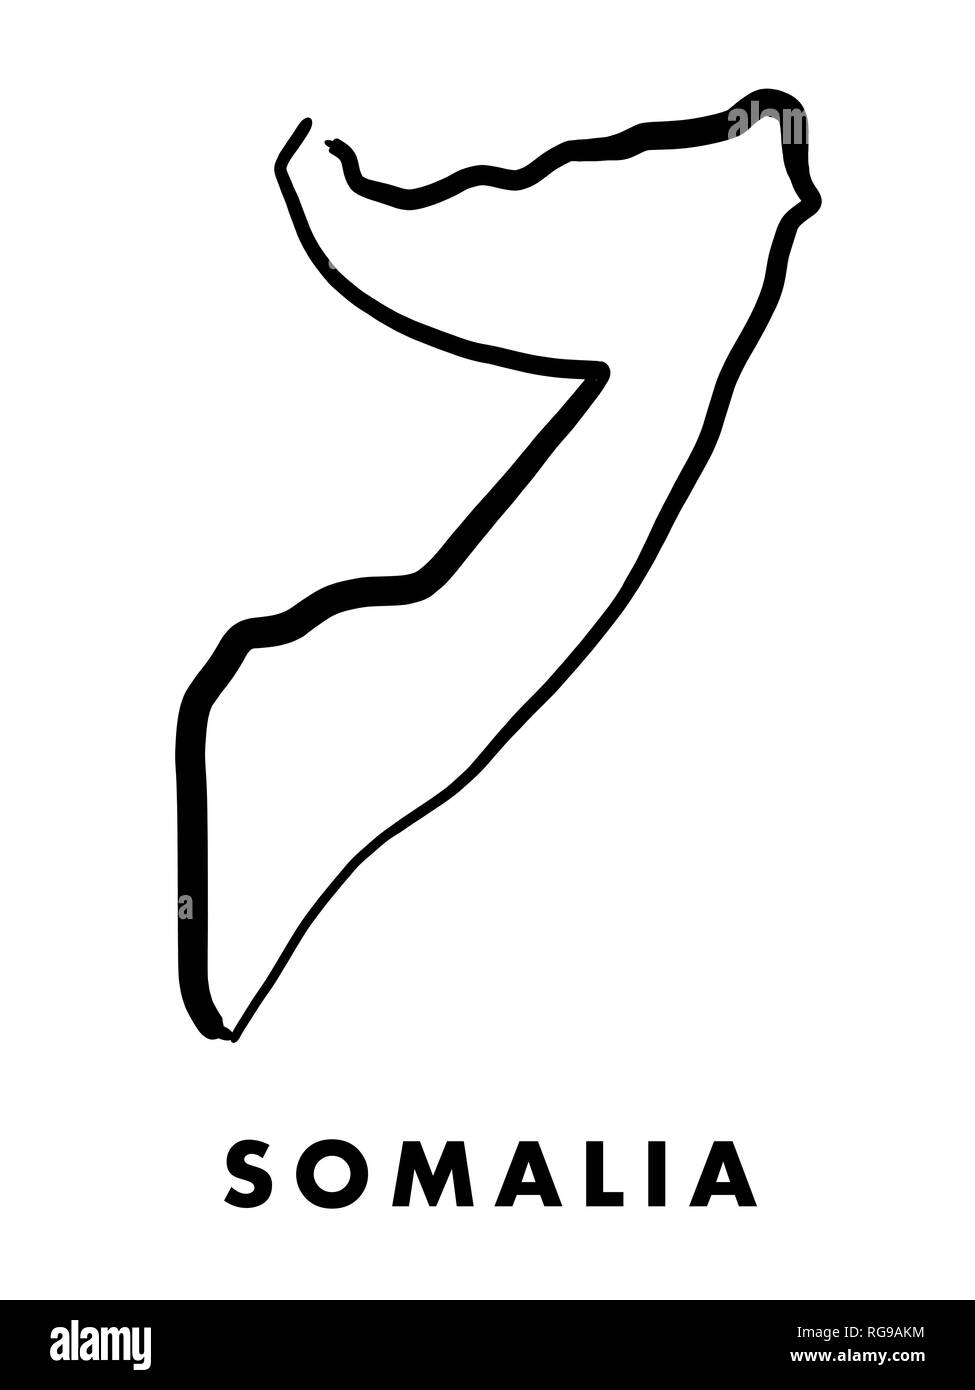 Somalia simple map outline - smooth simplified country shape map vector. Stock Vector